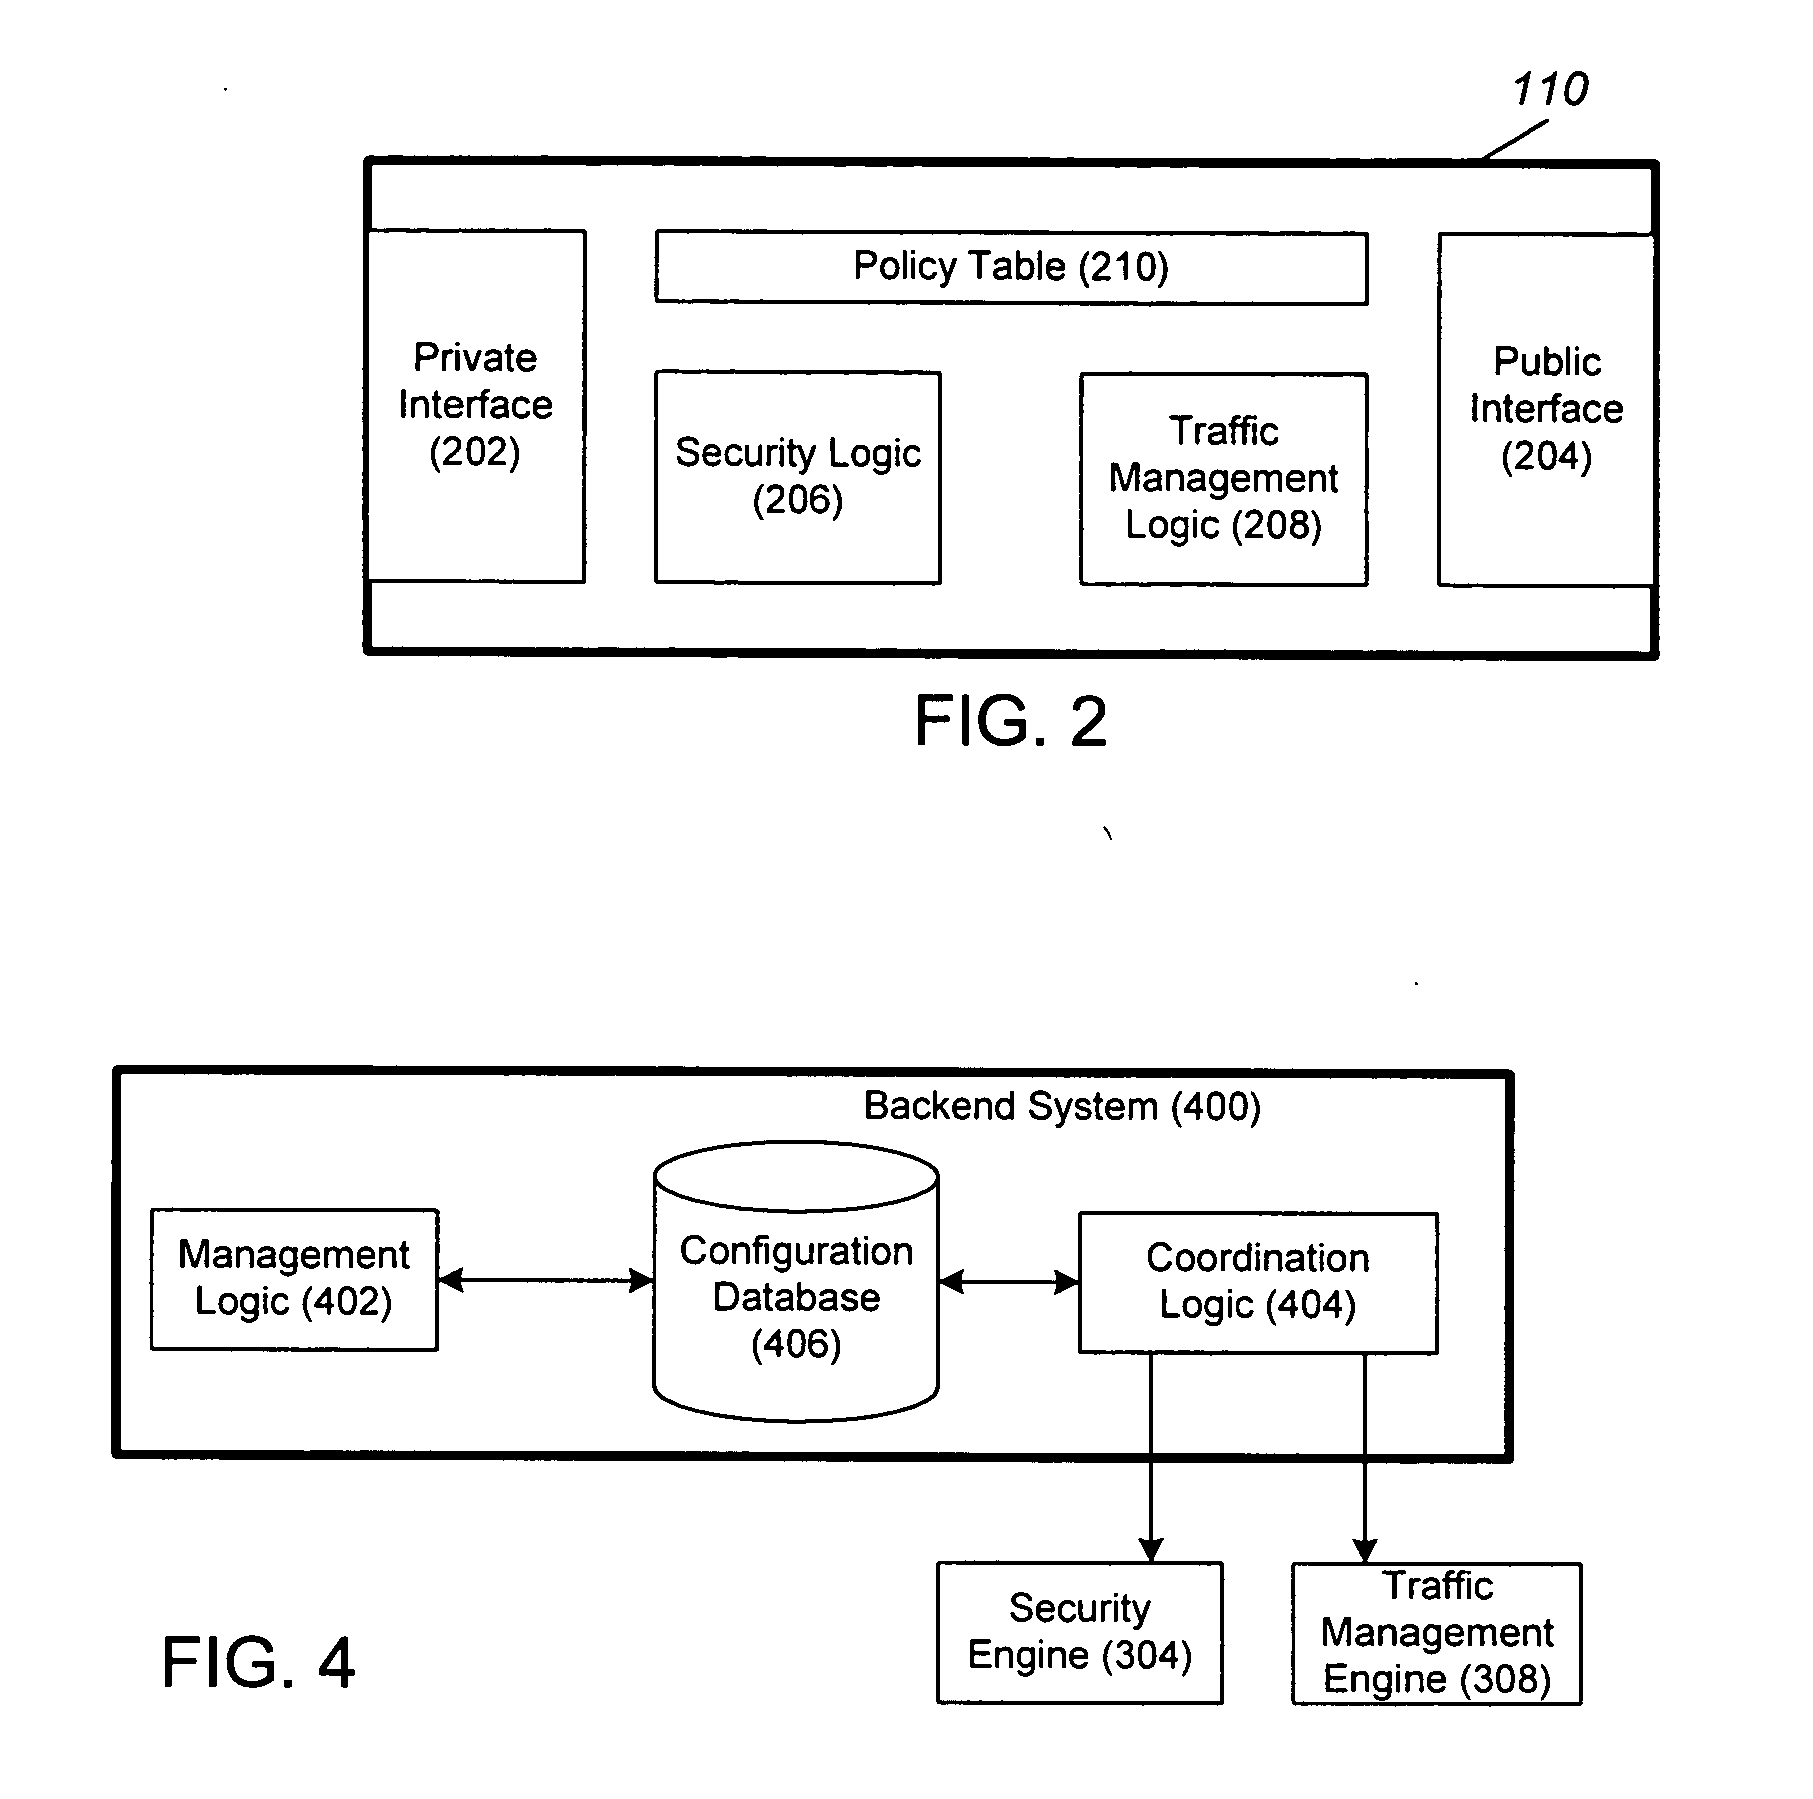 Network interface device